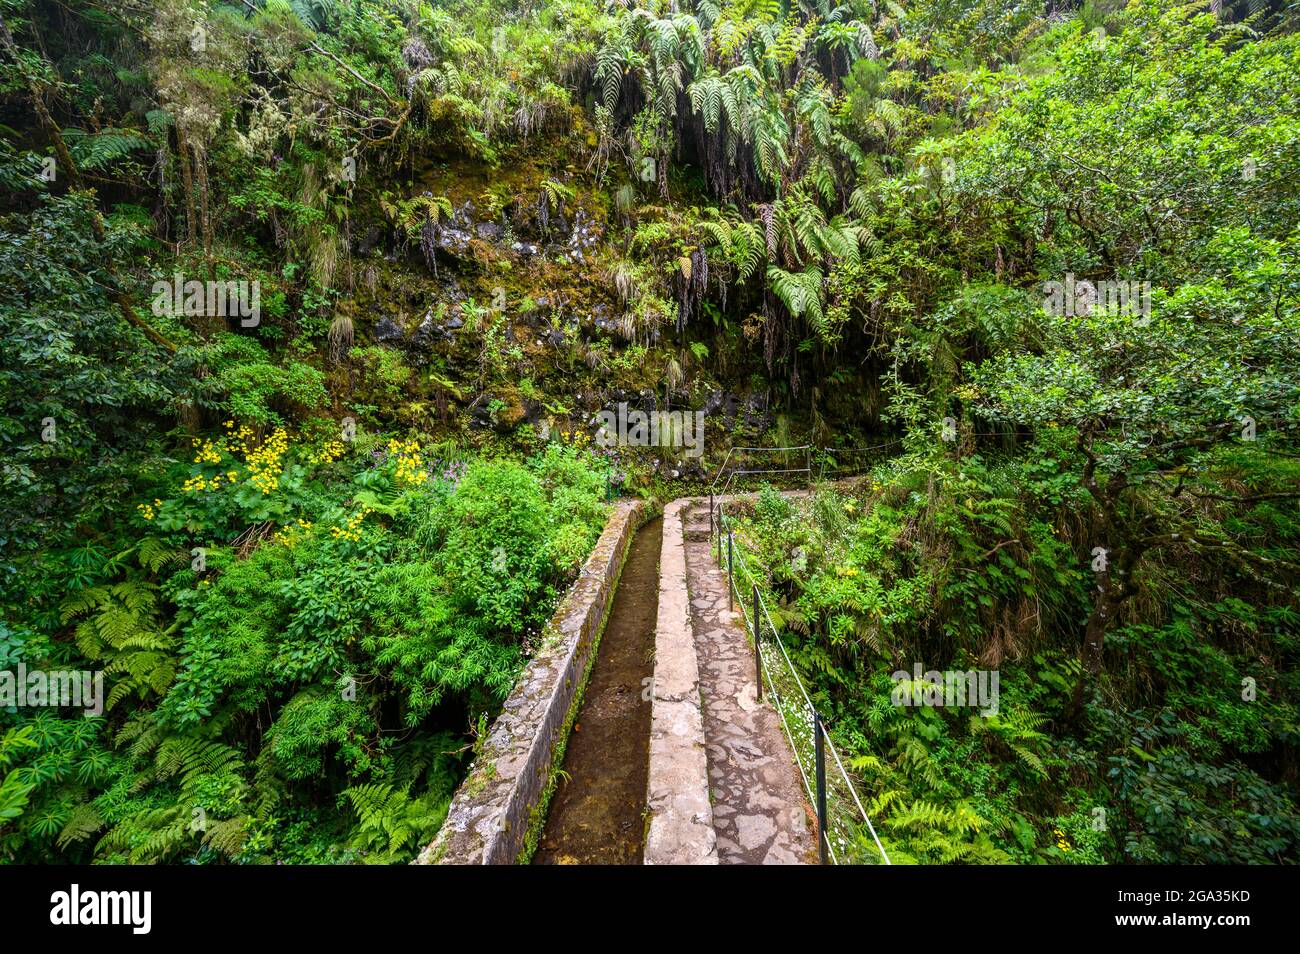 Levada do Caldeirão - hiking path in the forest in Levada do Caldeirao Verde Trail - tropical scenery on Madeira island, Portugal. Stock Photo